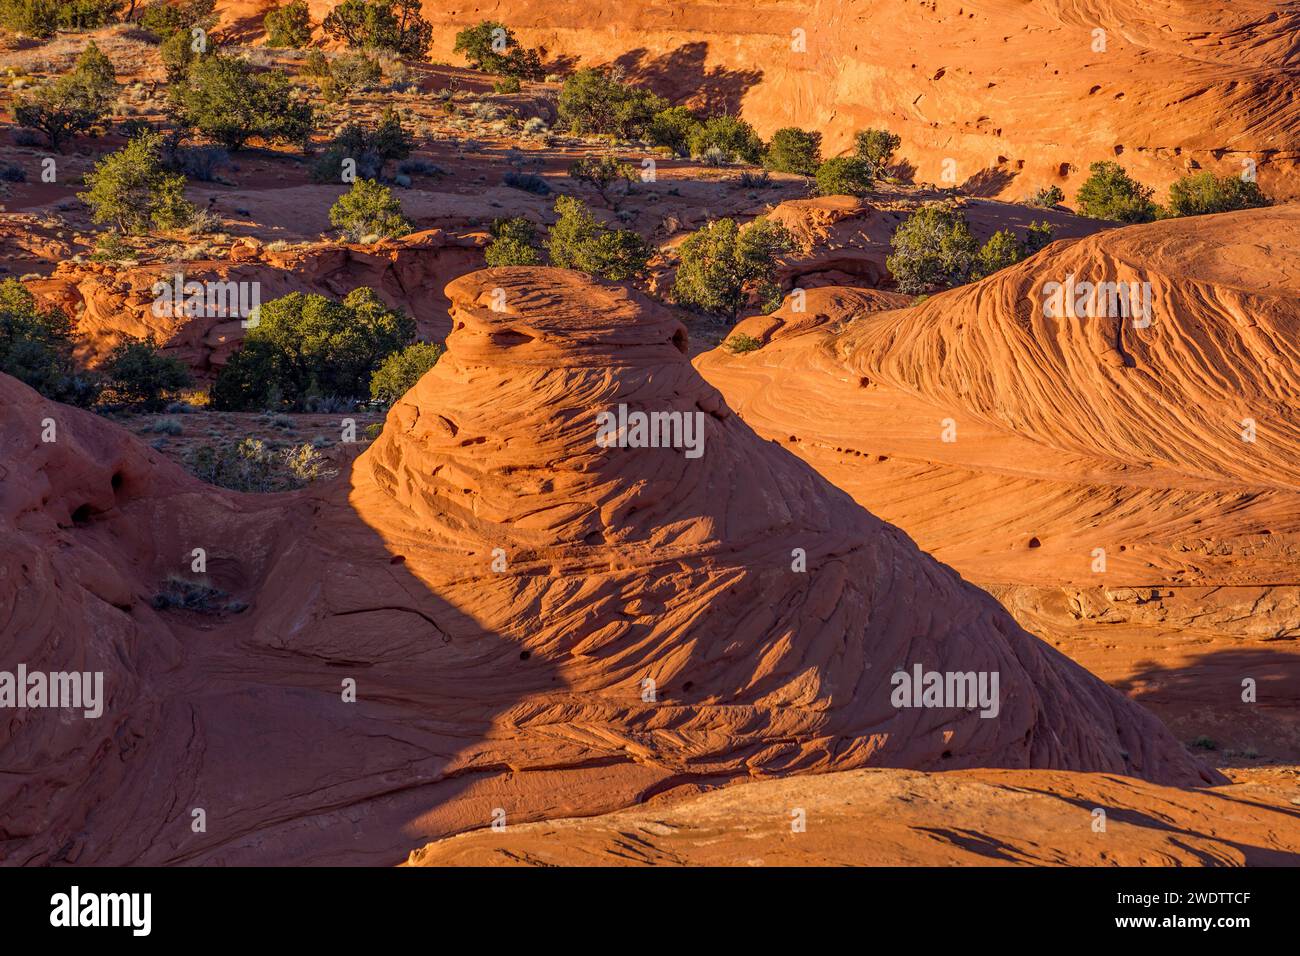 Cross-bedding patterns in the eroded sandstone in Mystery Valley in the Monument Valley Navajo Tribal Park in Arizona. Stock Photo